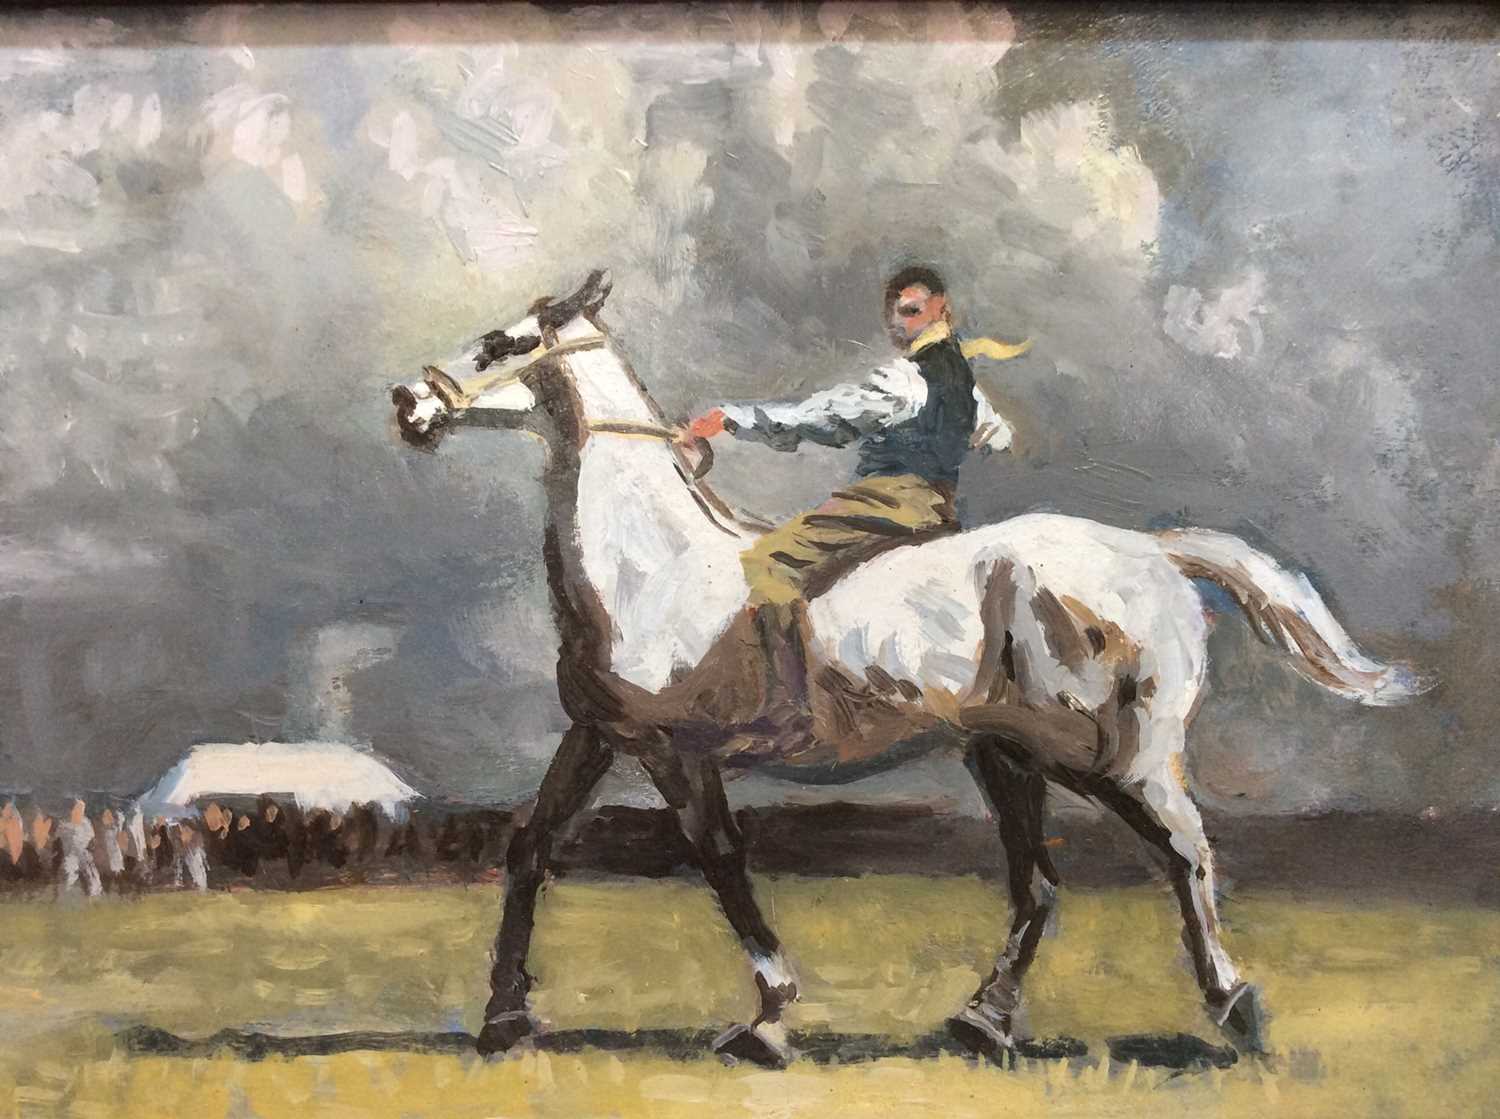 Lot 96 - Manner of Alfred J. Munnings oil on board- stable boy on a grey hunter with crowd beyond, in black frame, 14cm x 20cm